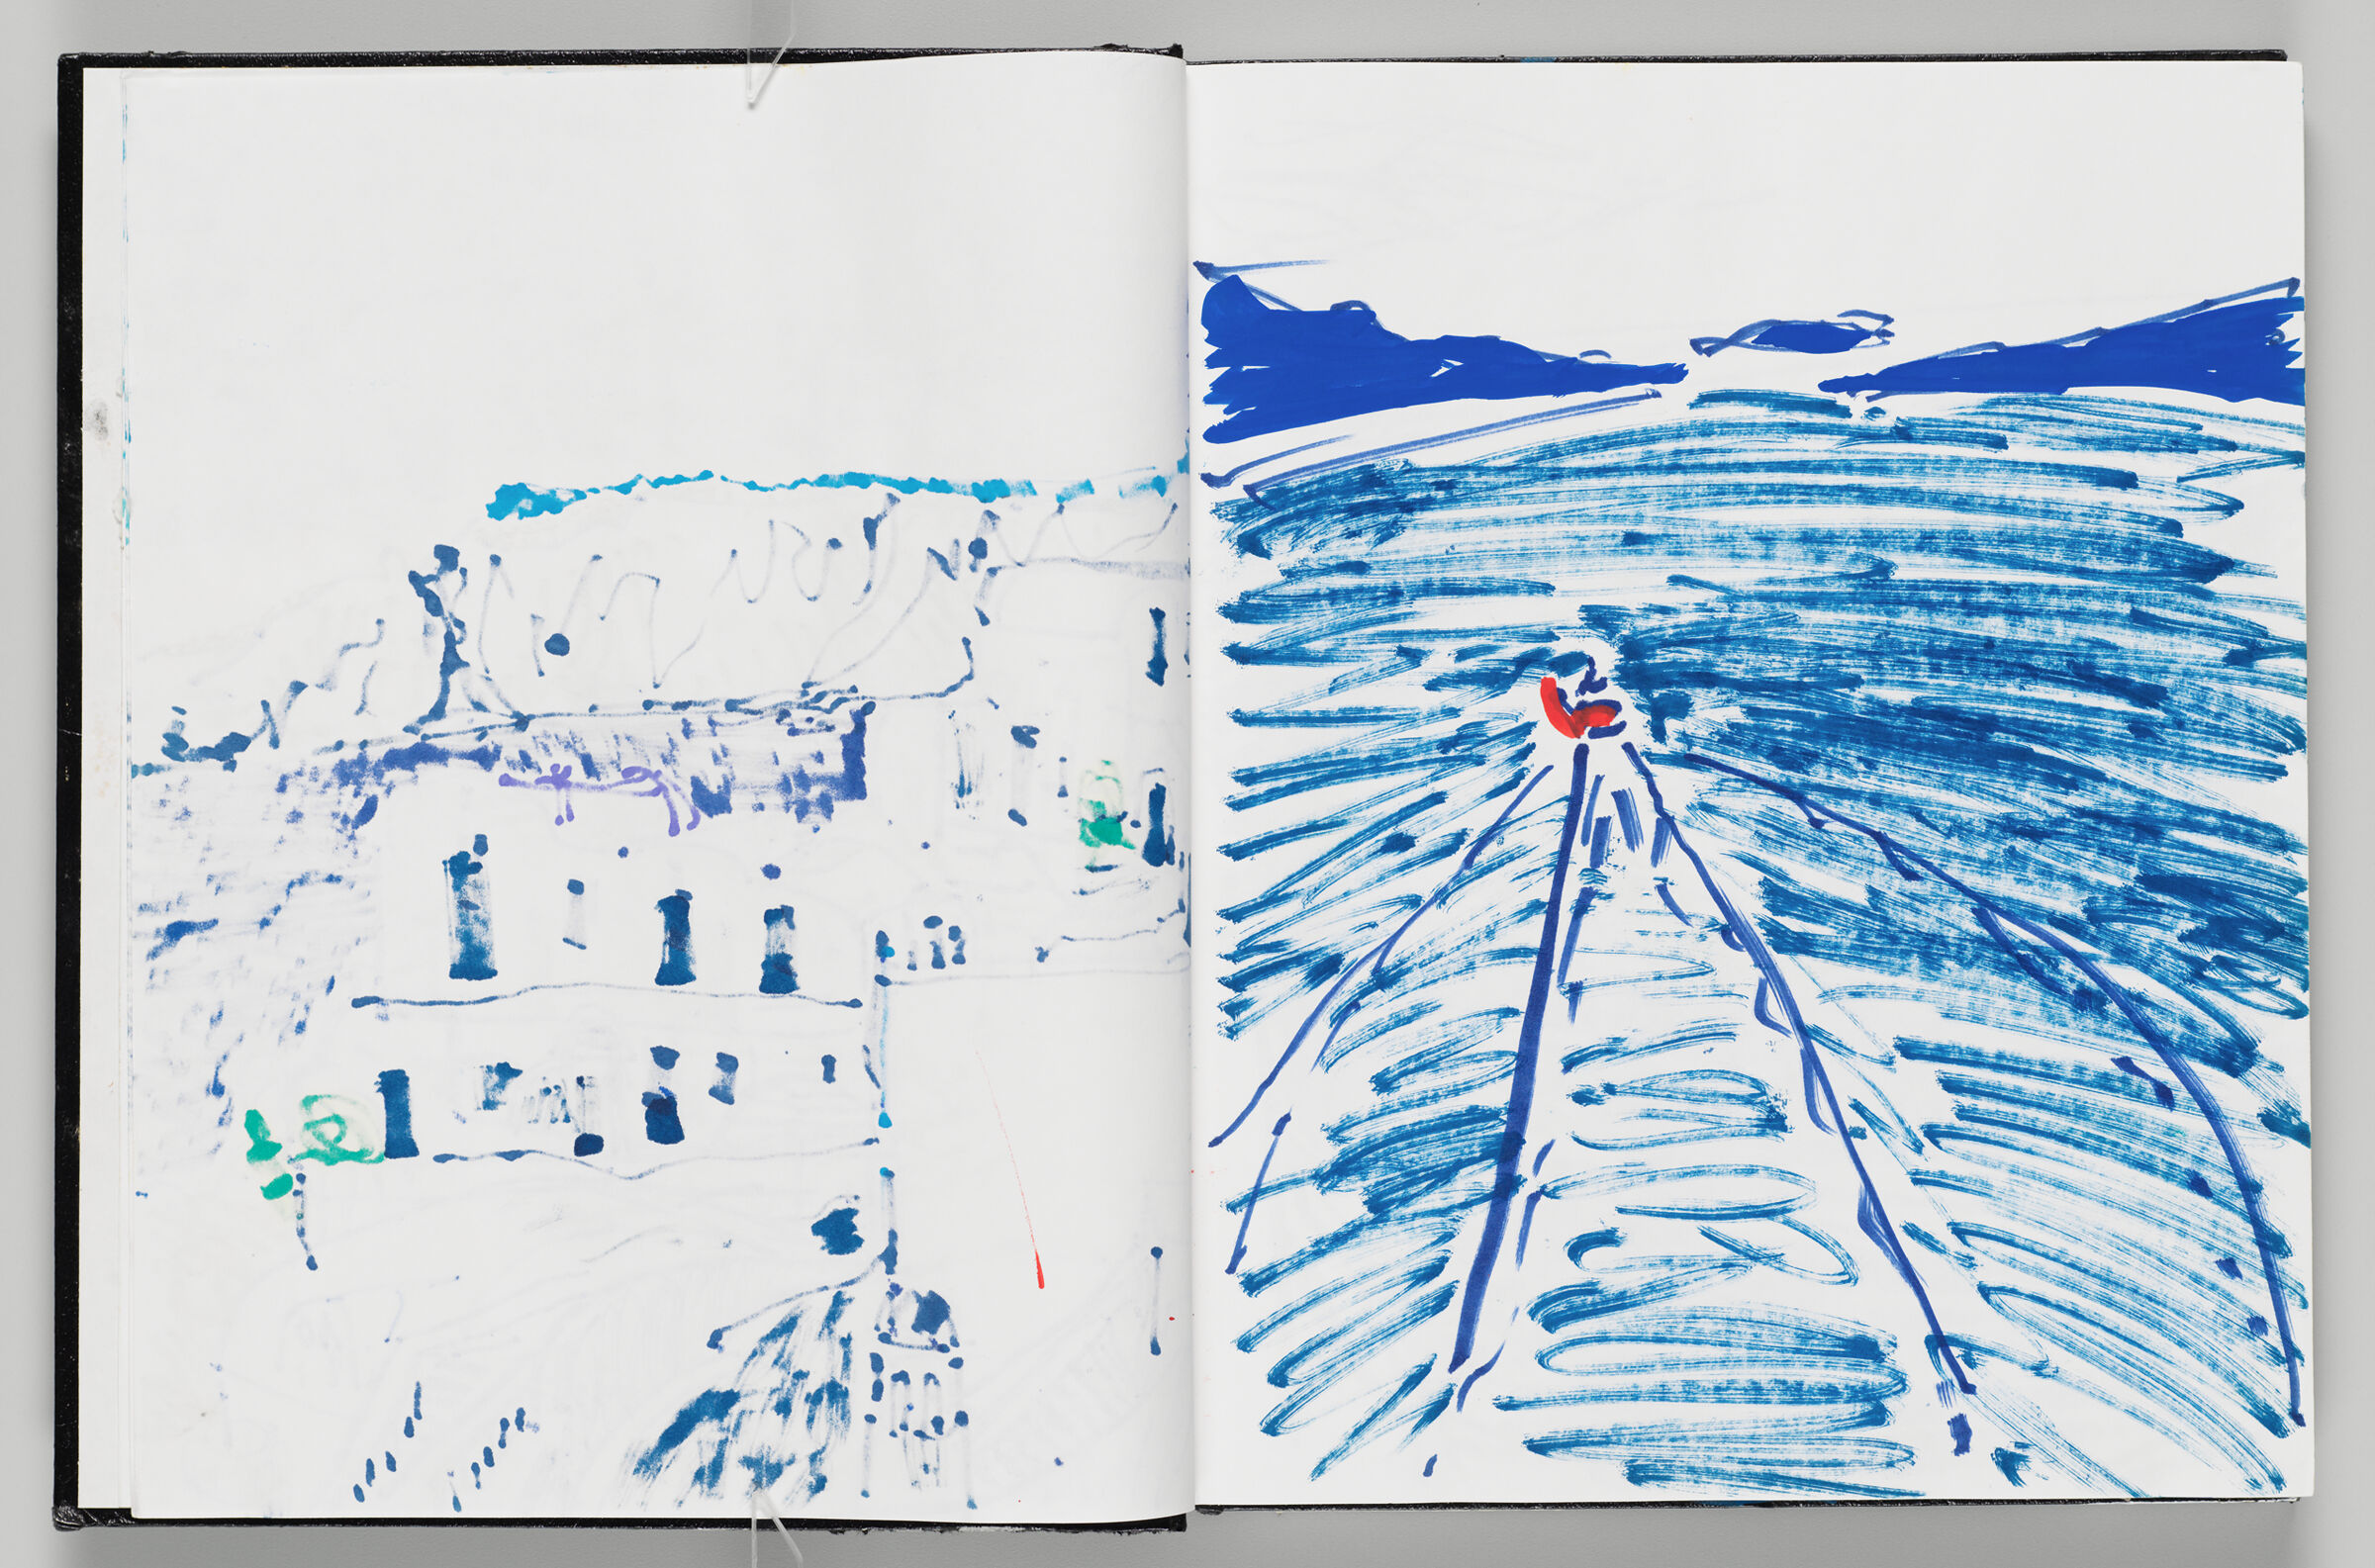 Untitled (Bleed-Through Of Previous Page, Left Page); Untitled (Santorini Seascape, Right Page)